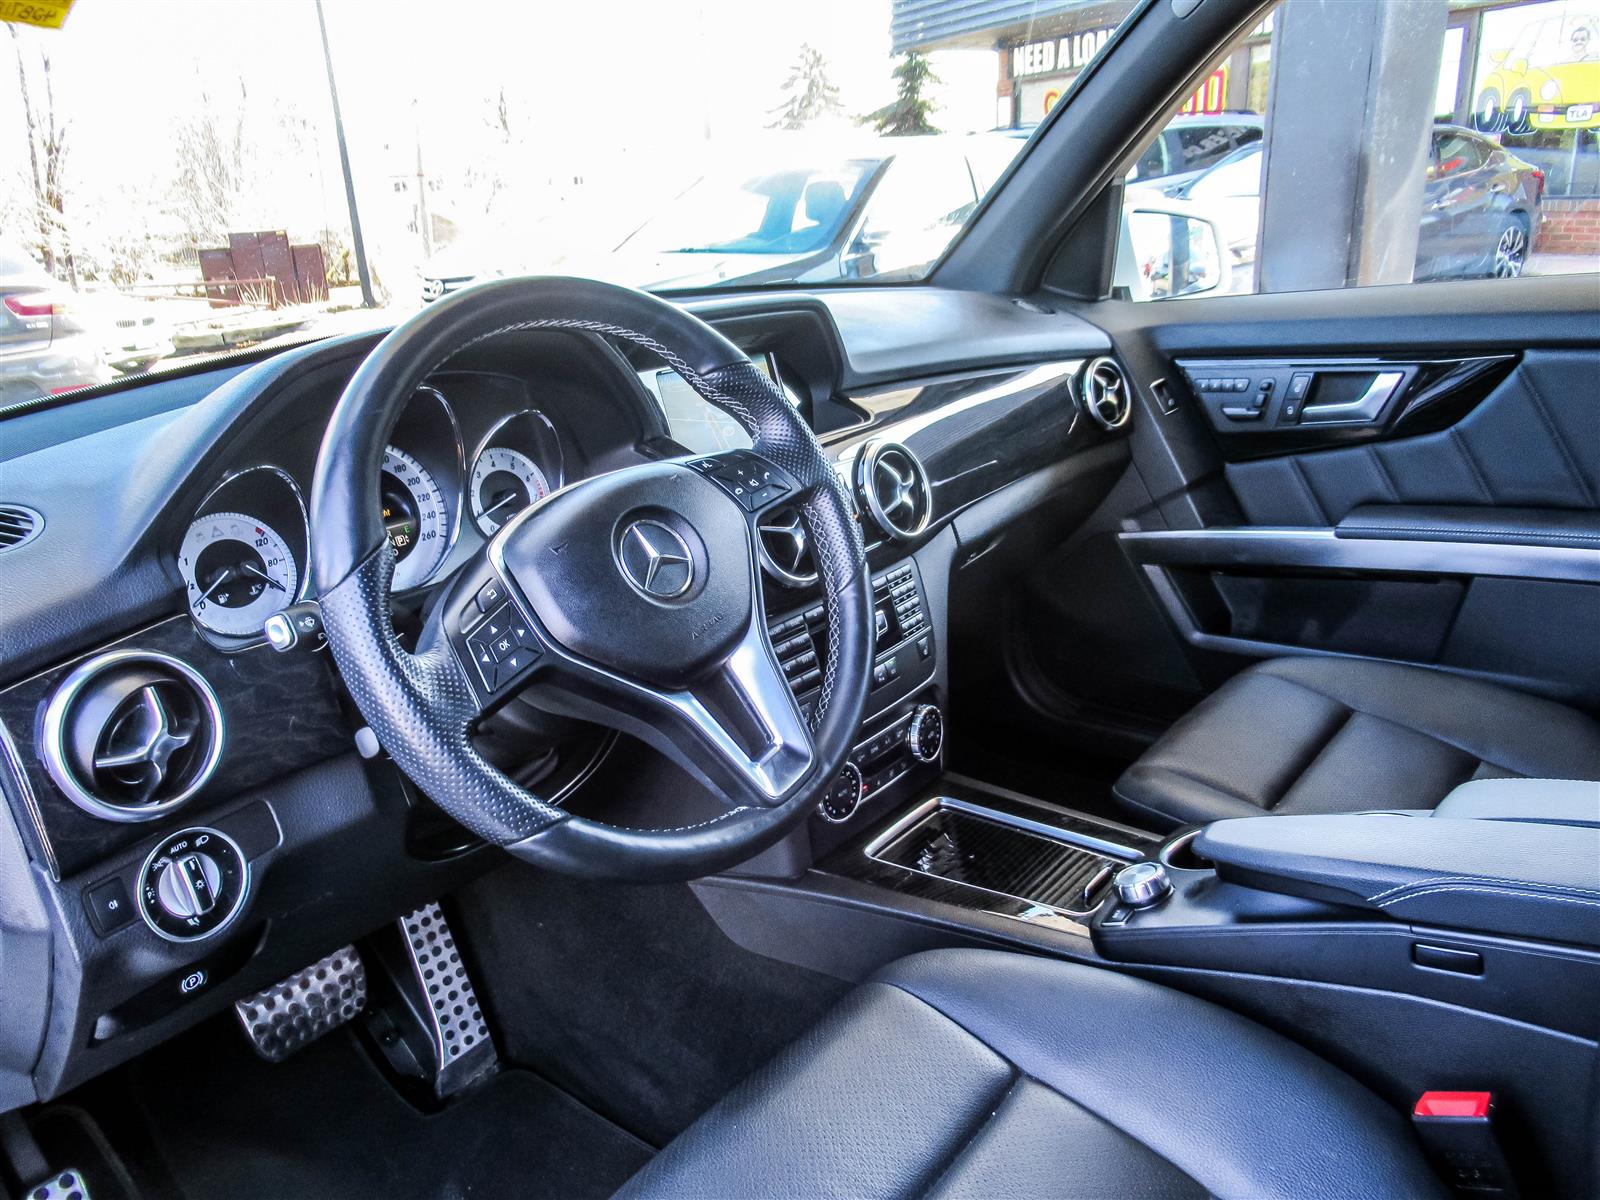 Used 2015 Mercedes-Benz GLK350 in Barrie,ON